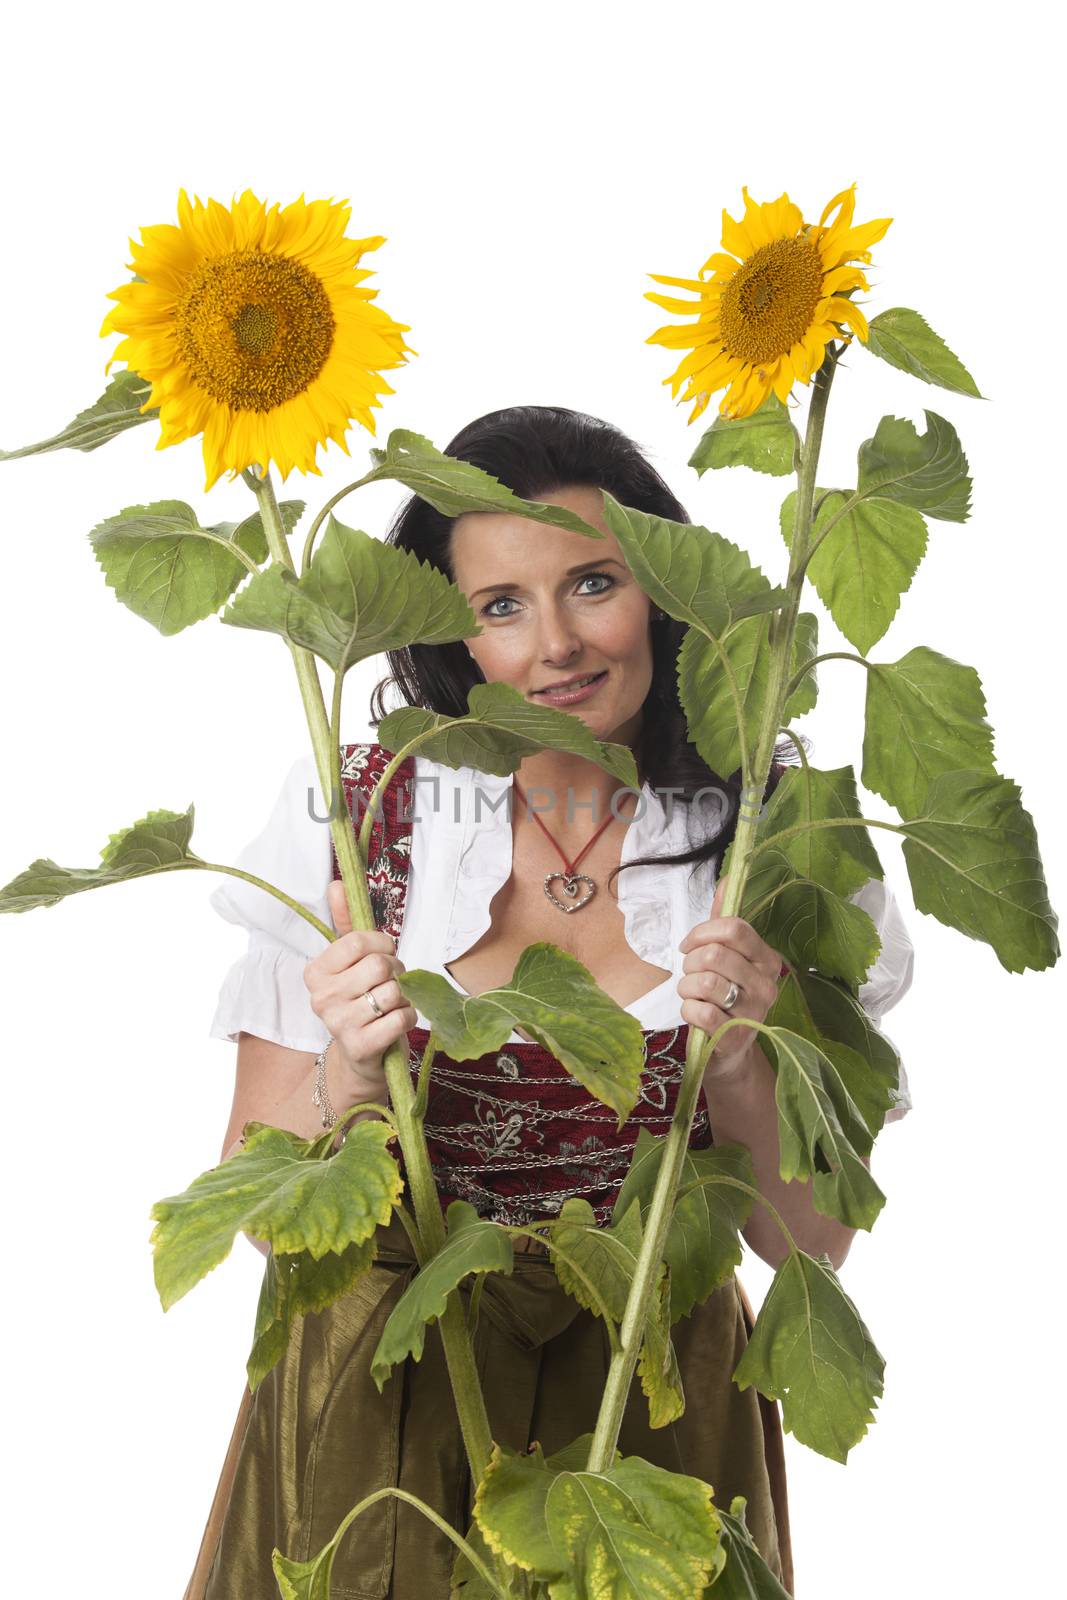 bavarian woman with sunflowers by bernjuer